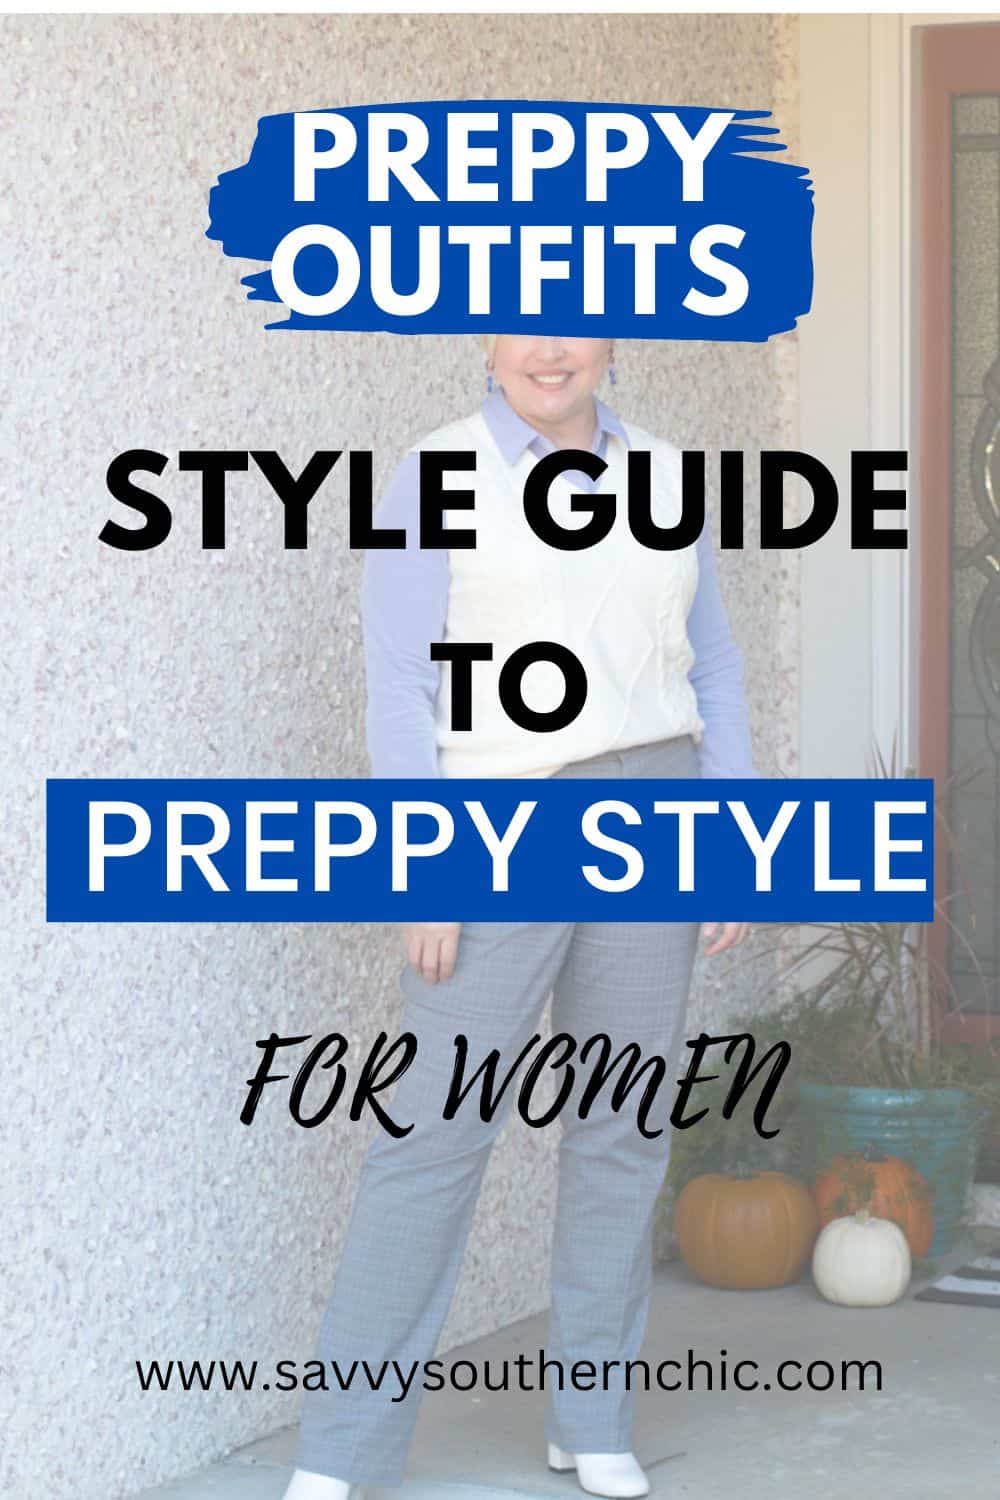 style guide to preppy style and preppy outfits